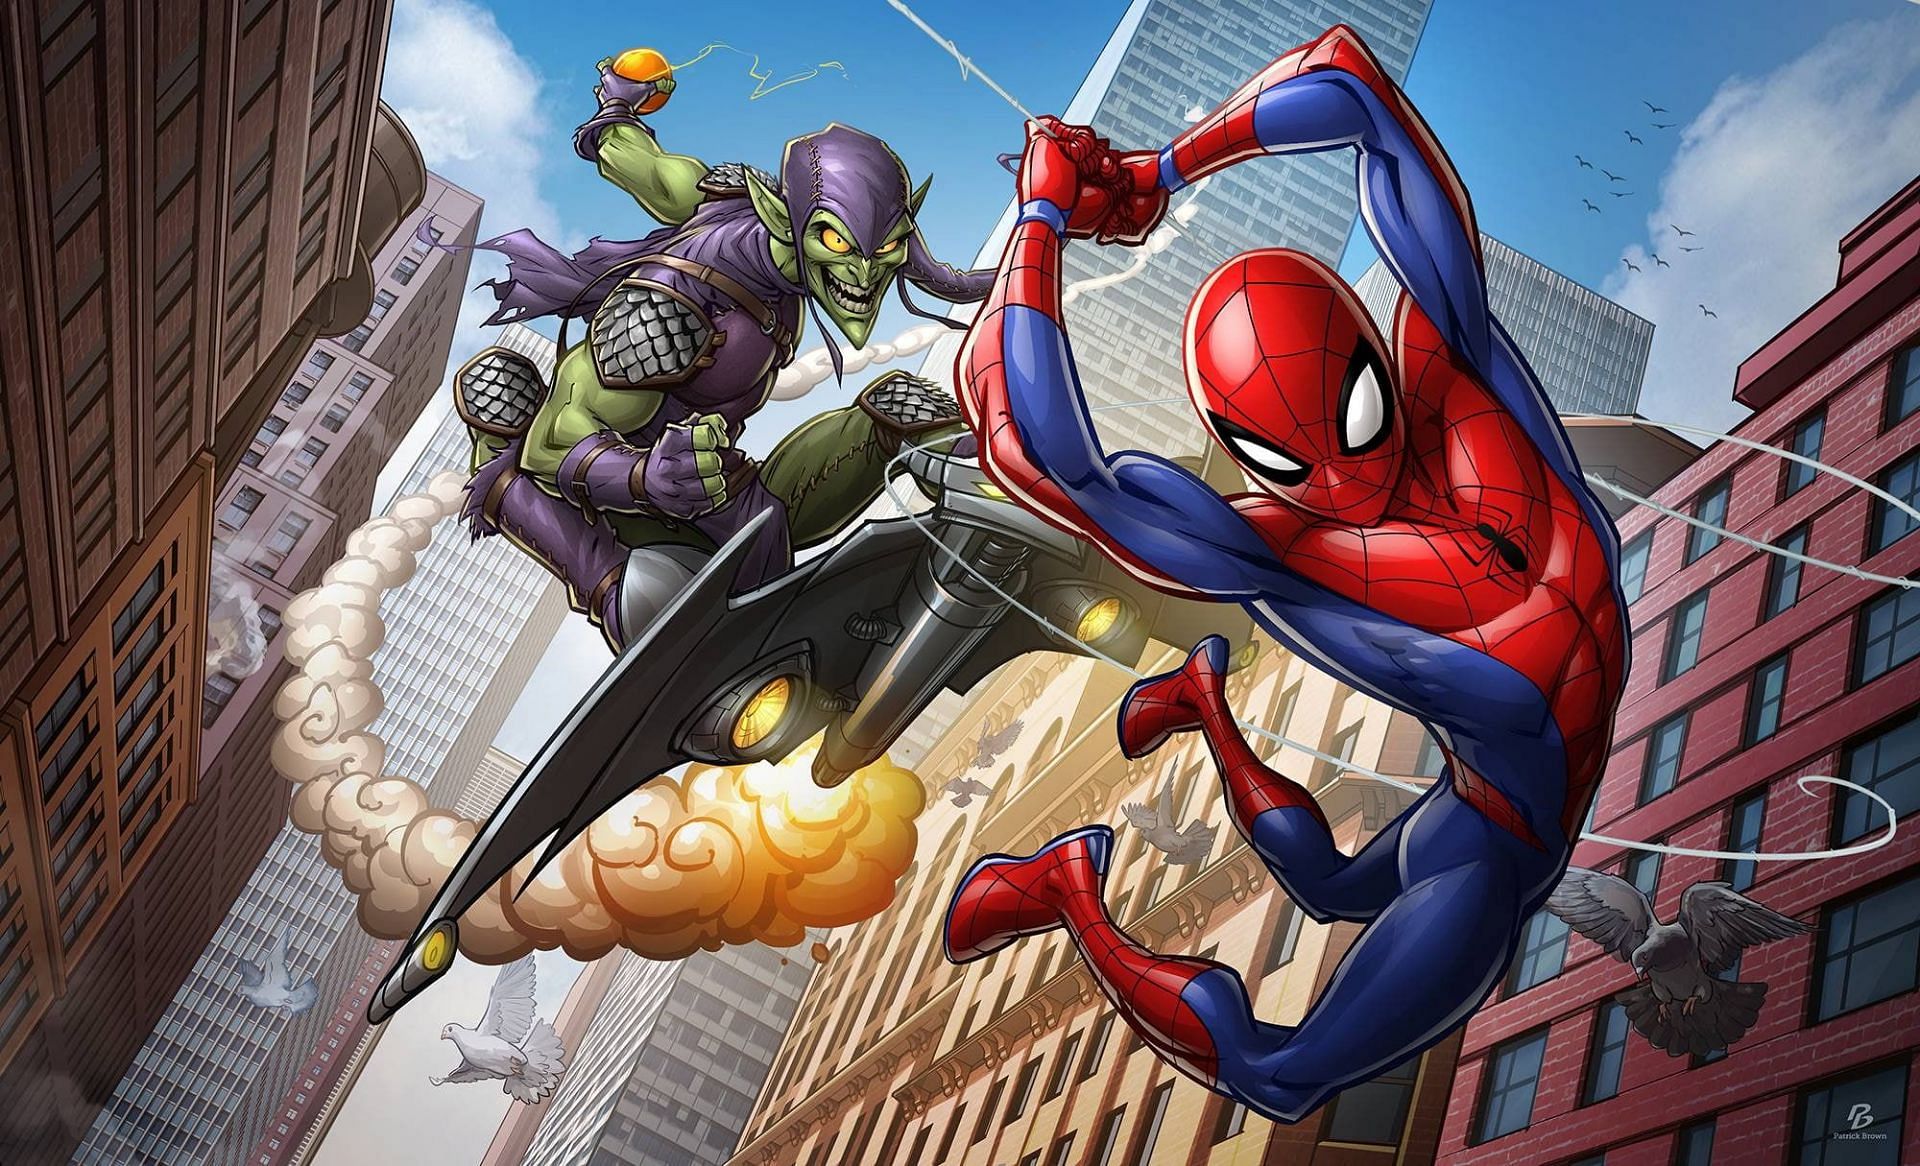 The clash between Spider-Man and the Green Goblin in &quot;Amazing Spider-Man #122&quot; stands as a legendary and monumental battle within the Marvel Comics universe. (Image Via Marvel)